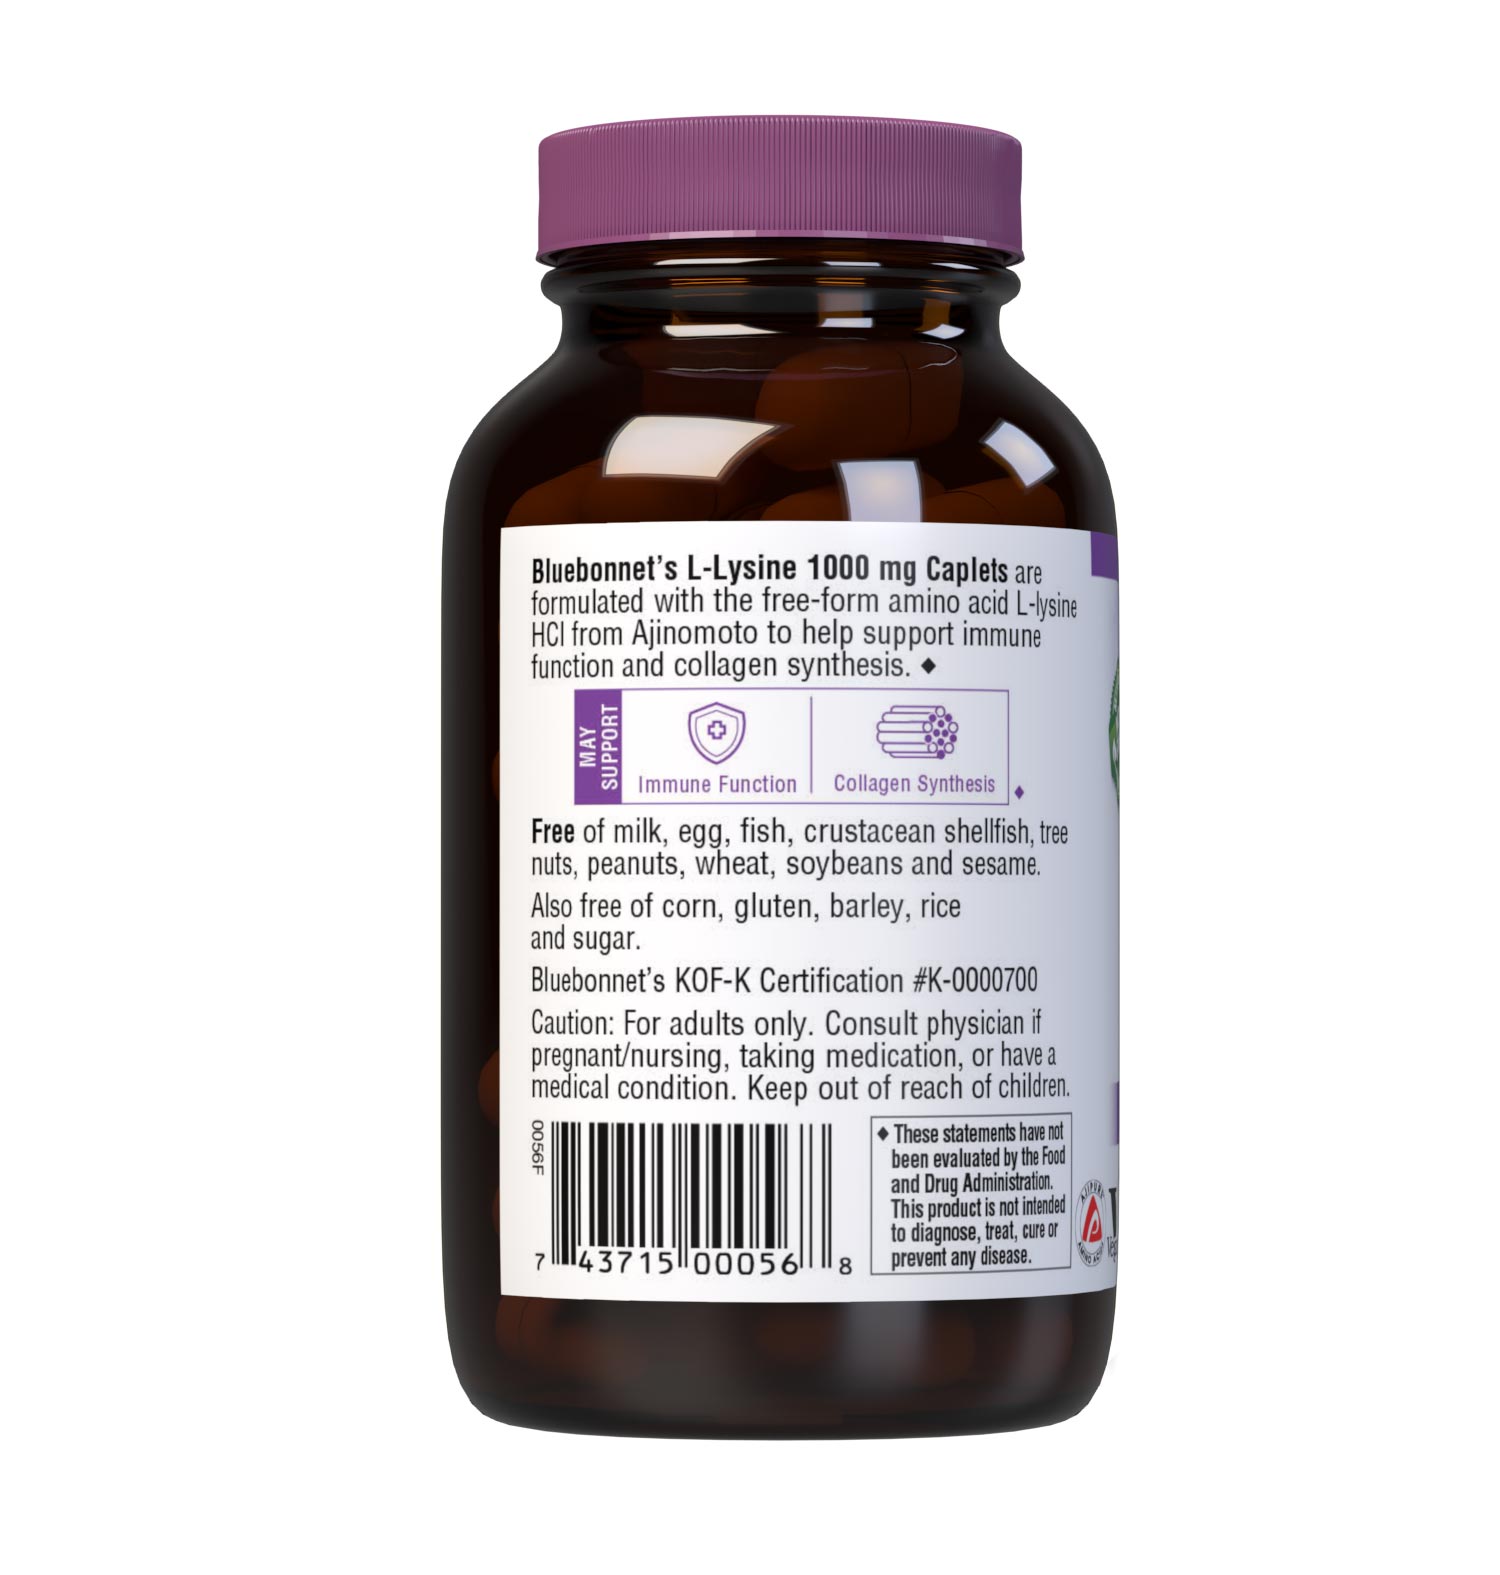 Bluebonnet’s L-Lysine 1000 mg 50 Caplets are formulated with the free-form amino acid L-lysine HCI in its crystalline form from Ajinomoto to help support immune function and collagen synthesis. Description panel. #size_50 count